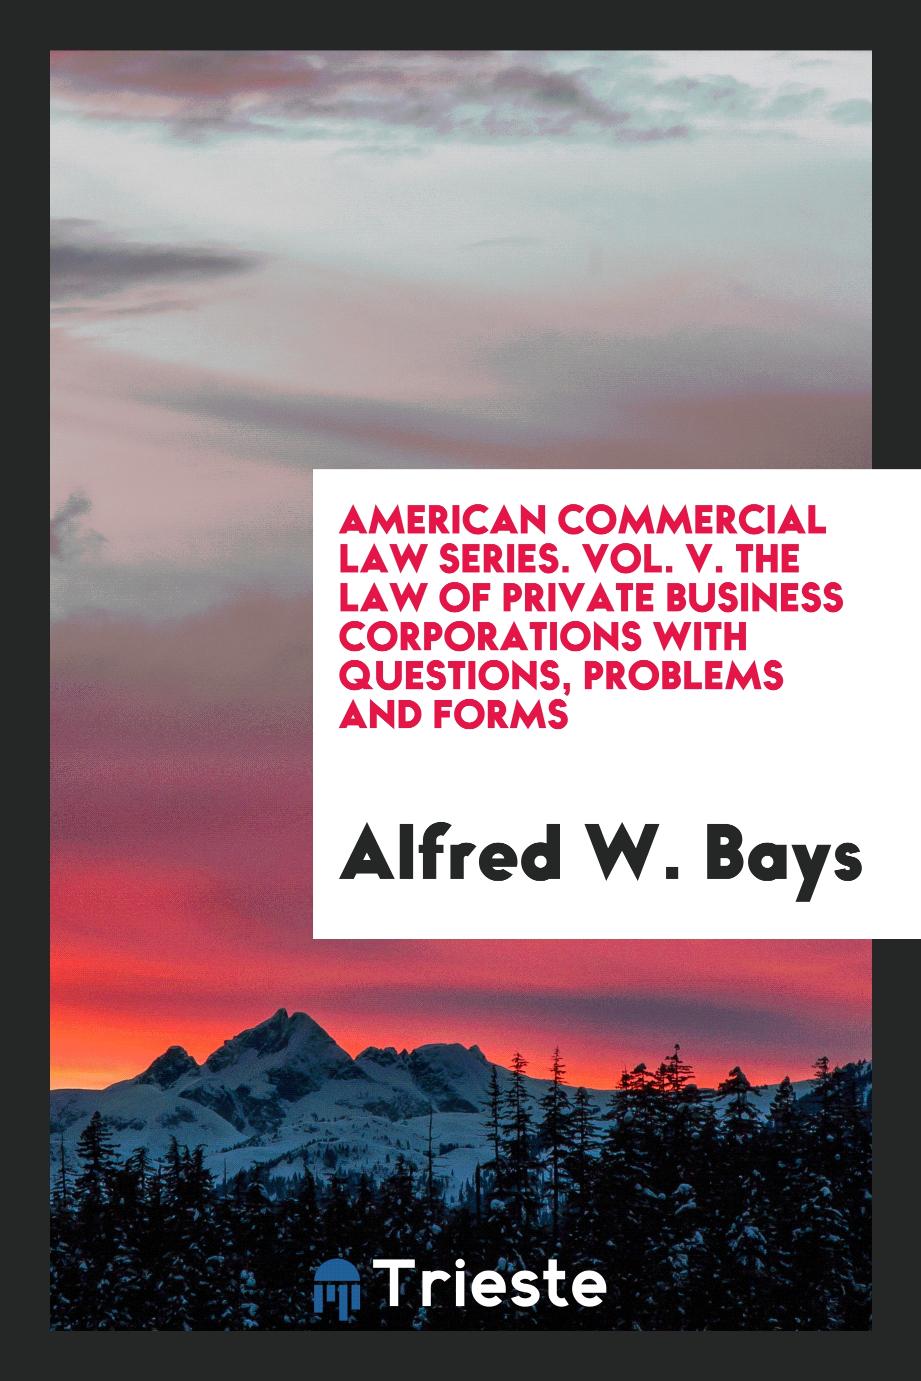 American commercial law series. Vol. V. The law of private business corporations with questions, problems and forms